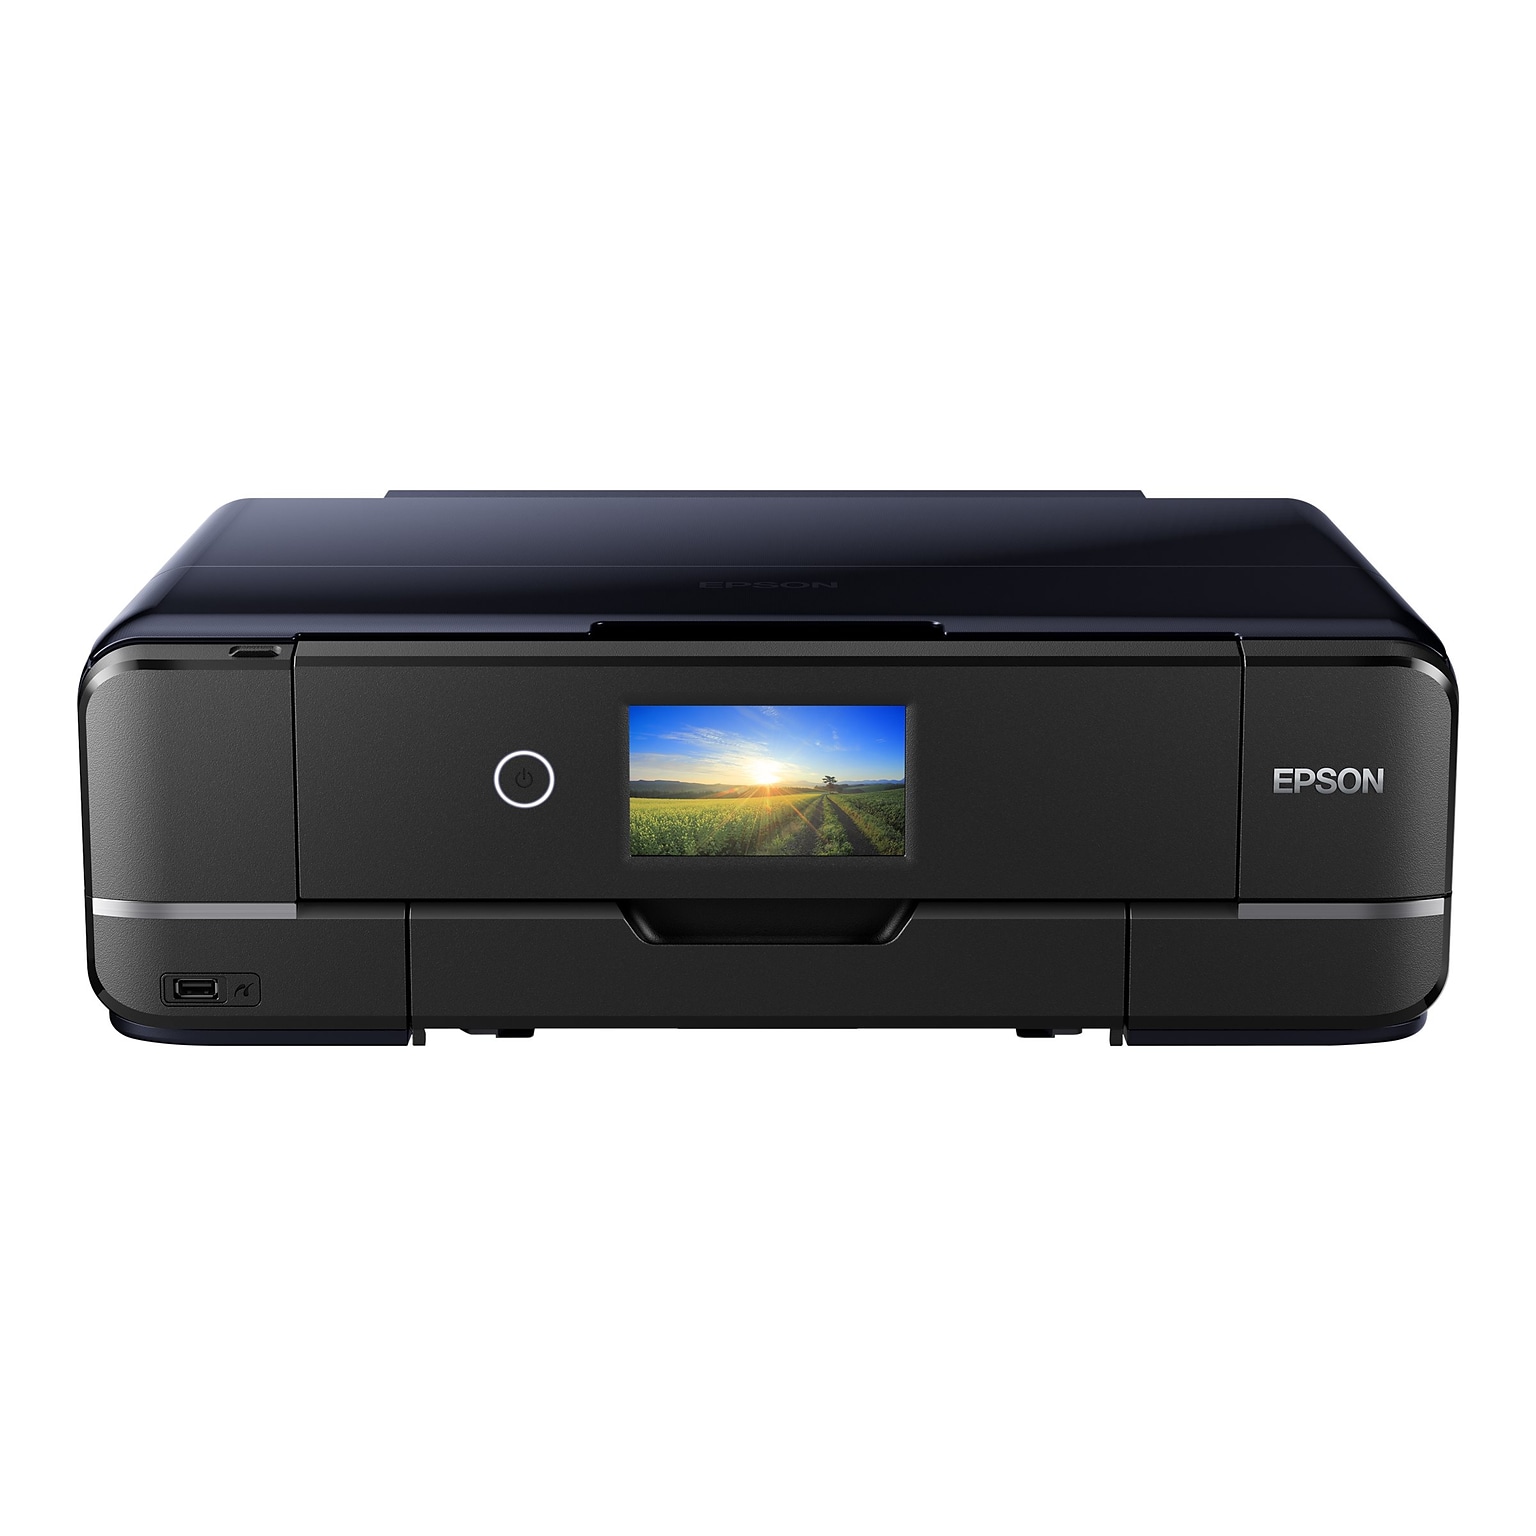 Epson Expression Photo Small-in-One C11CH45201 Color All-in-One Borderless  Printer, Black (XP-970) | Quill.com